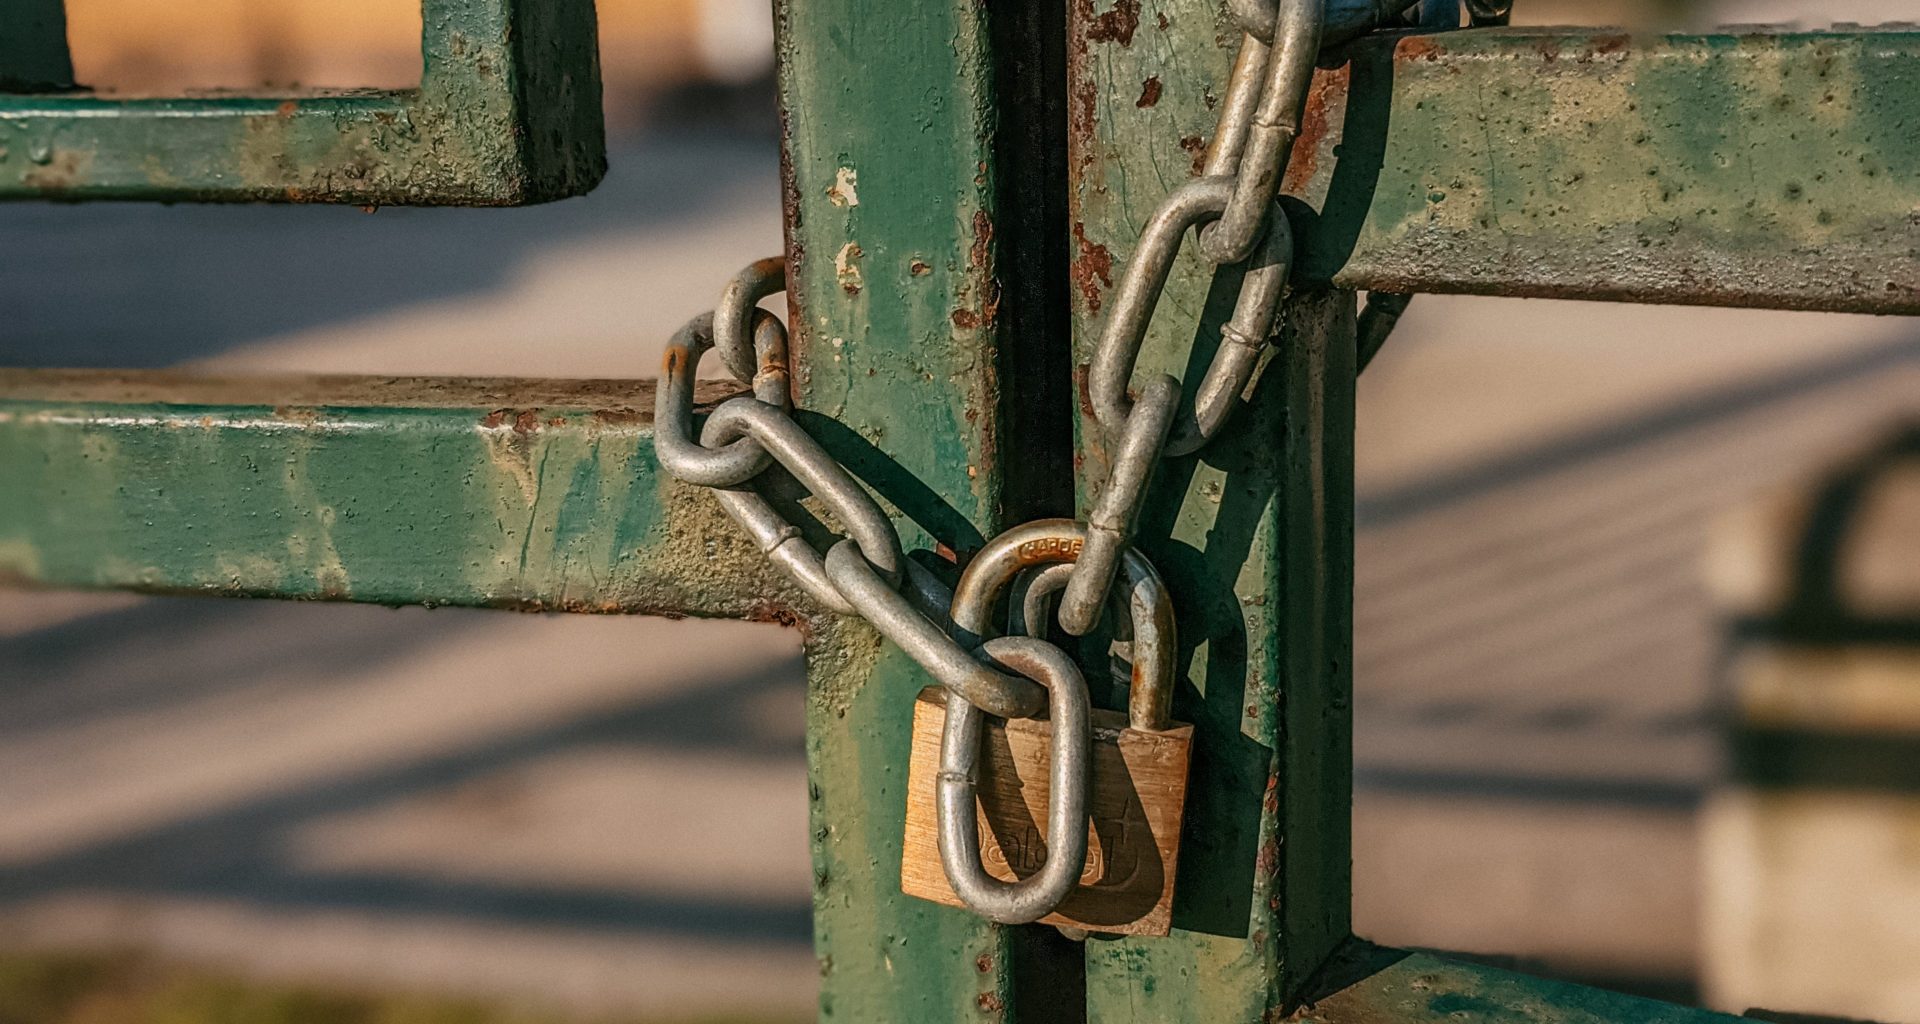 Locked gates and keep out signs: hundreds of access issues logged by councils 3